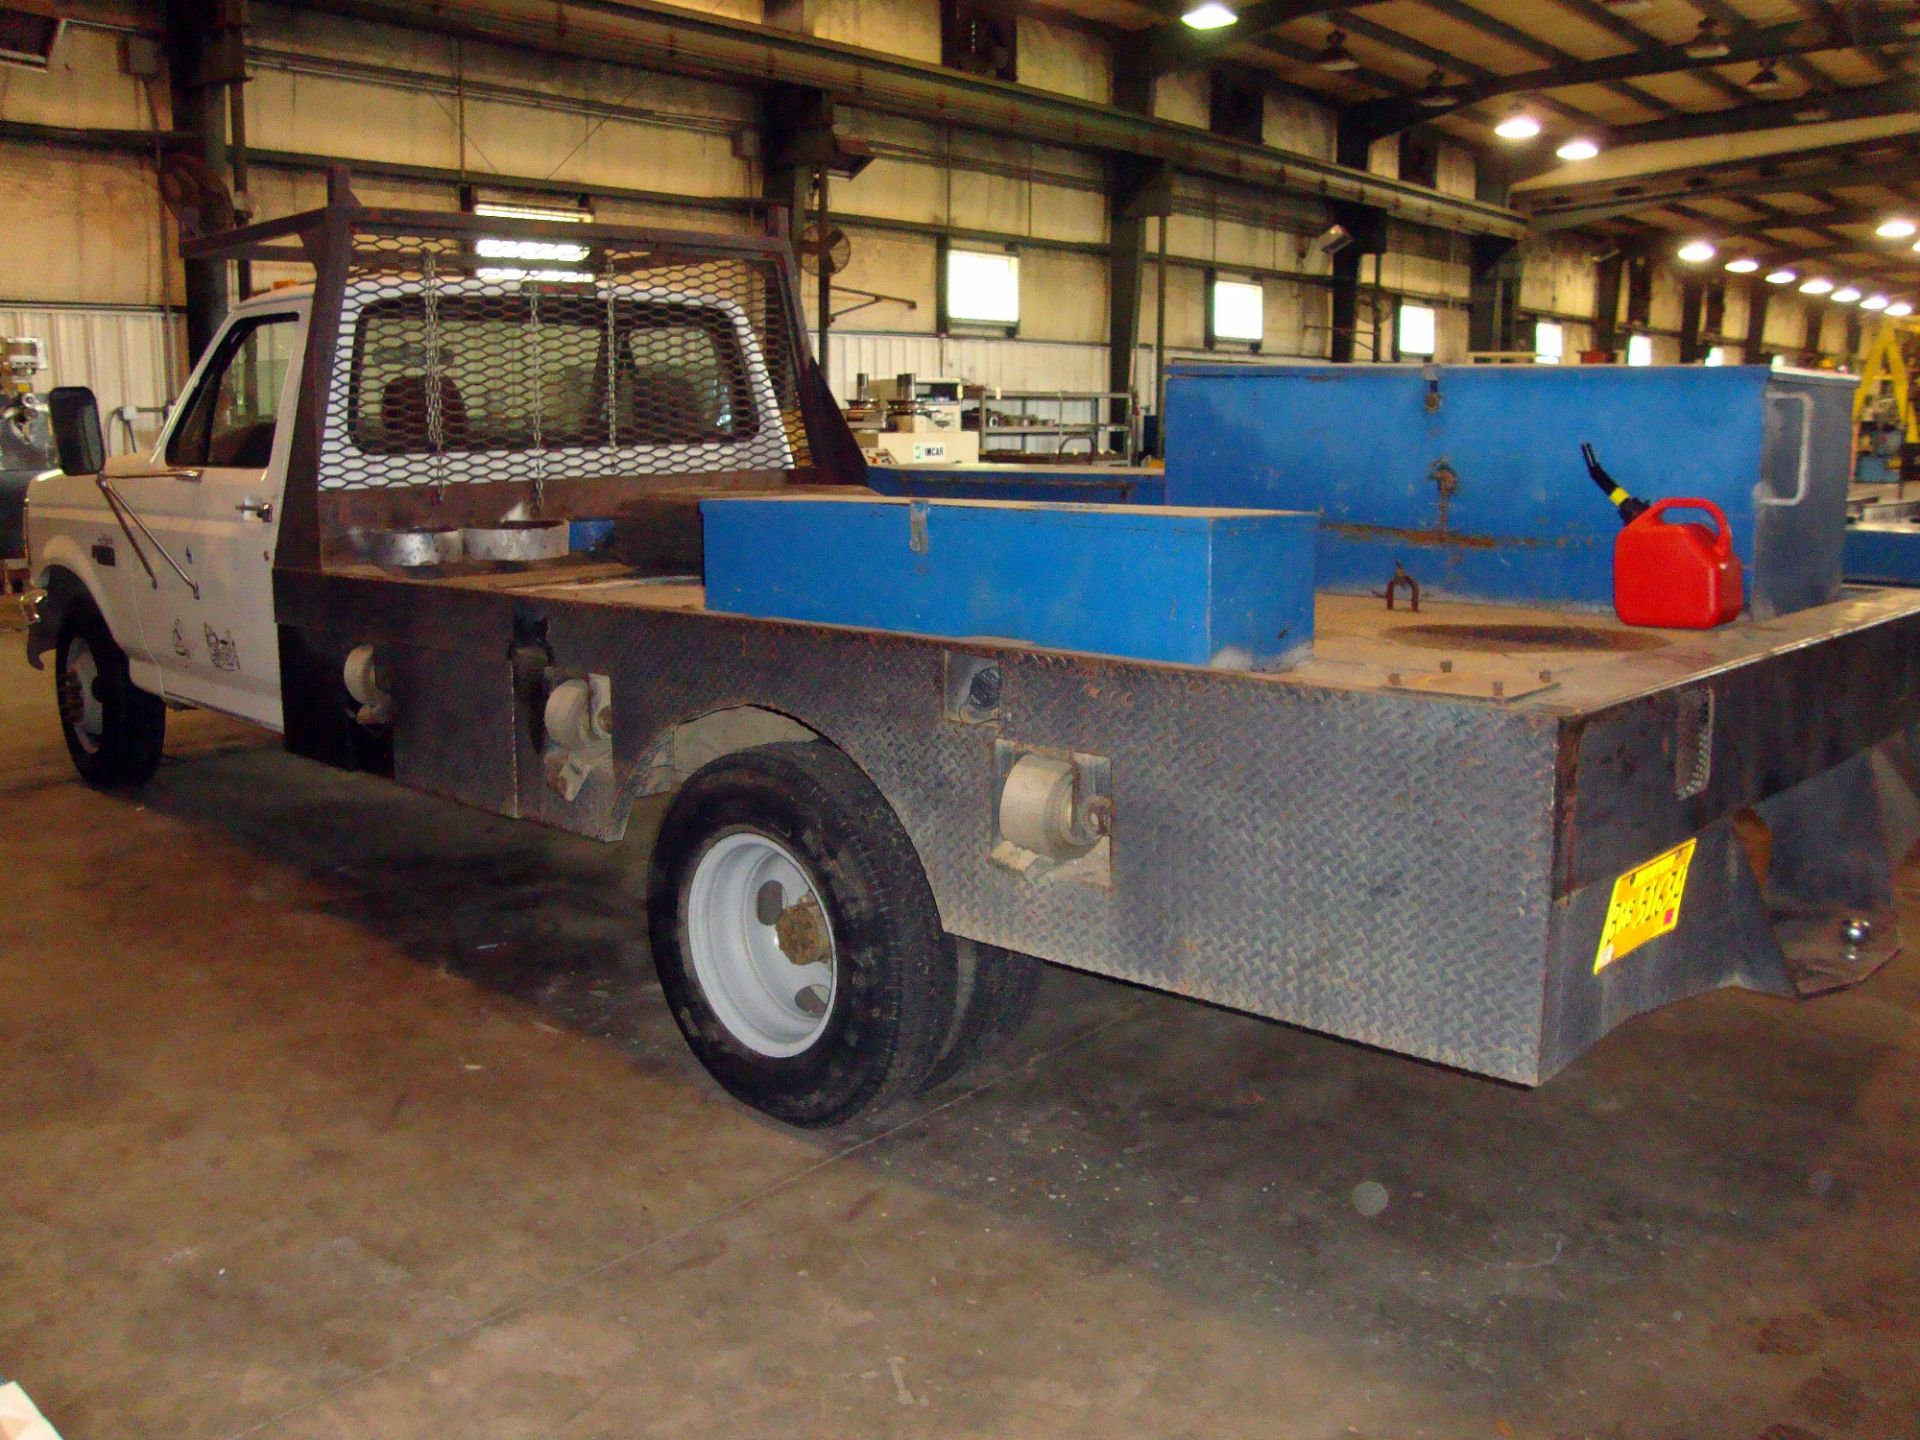 FLATBED TRUCK, 1994 FORD MDL. F350XL, 4-spd. manual trans. w/overdrive, gasoline engine, 84"W. x - Image 3 of 3